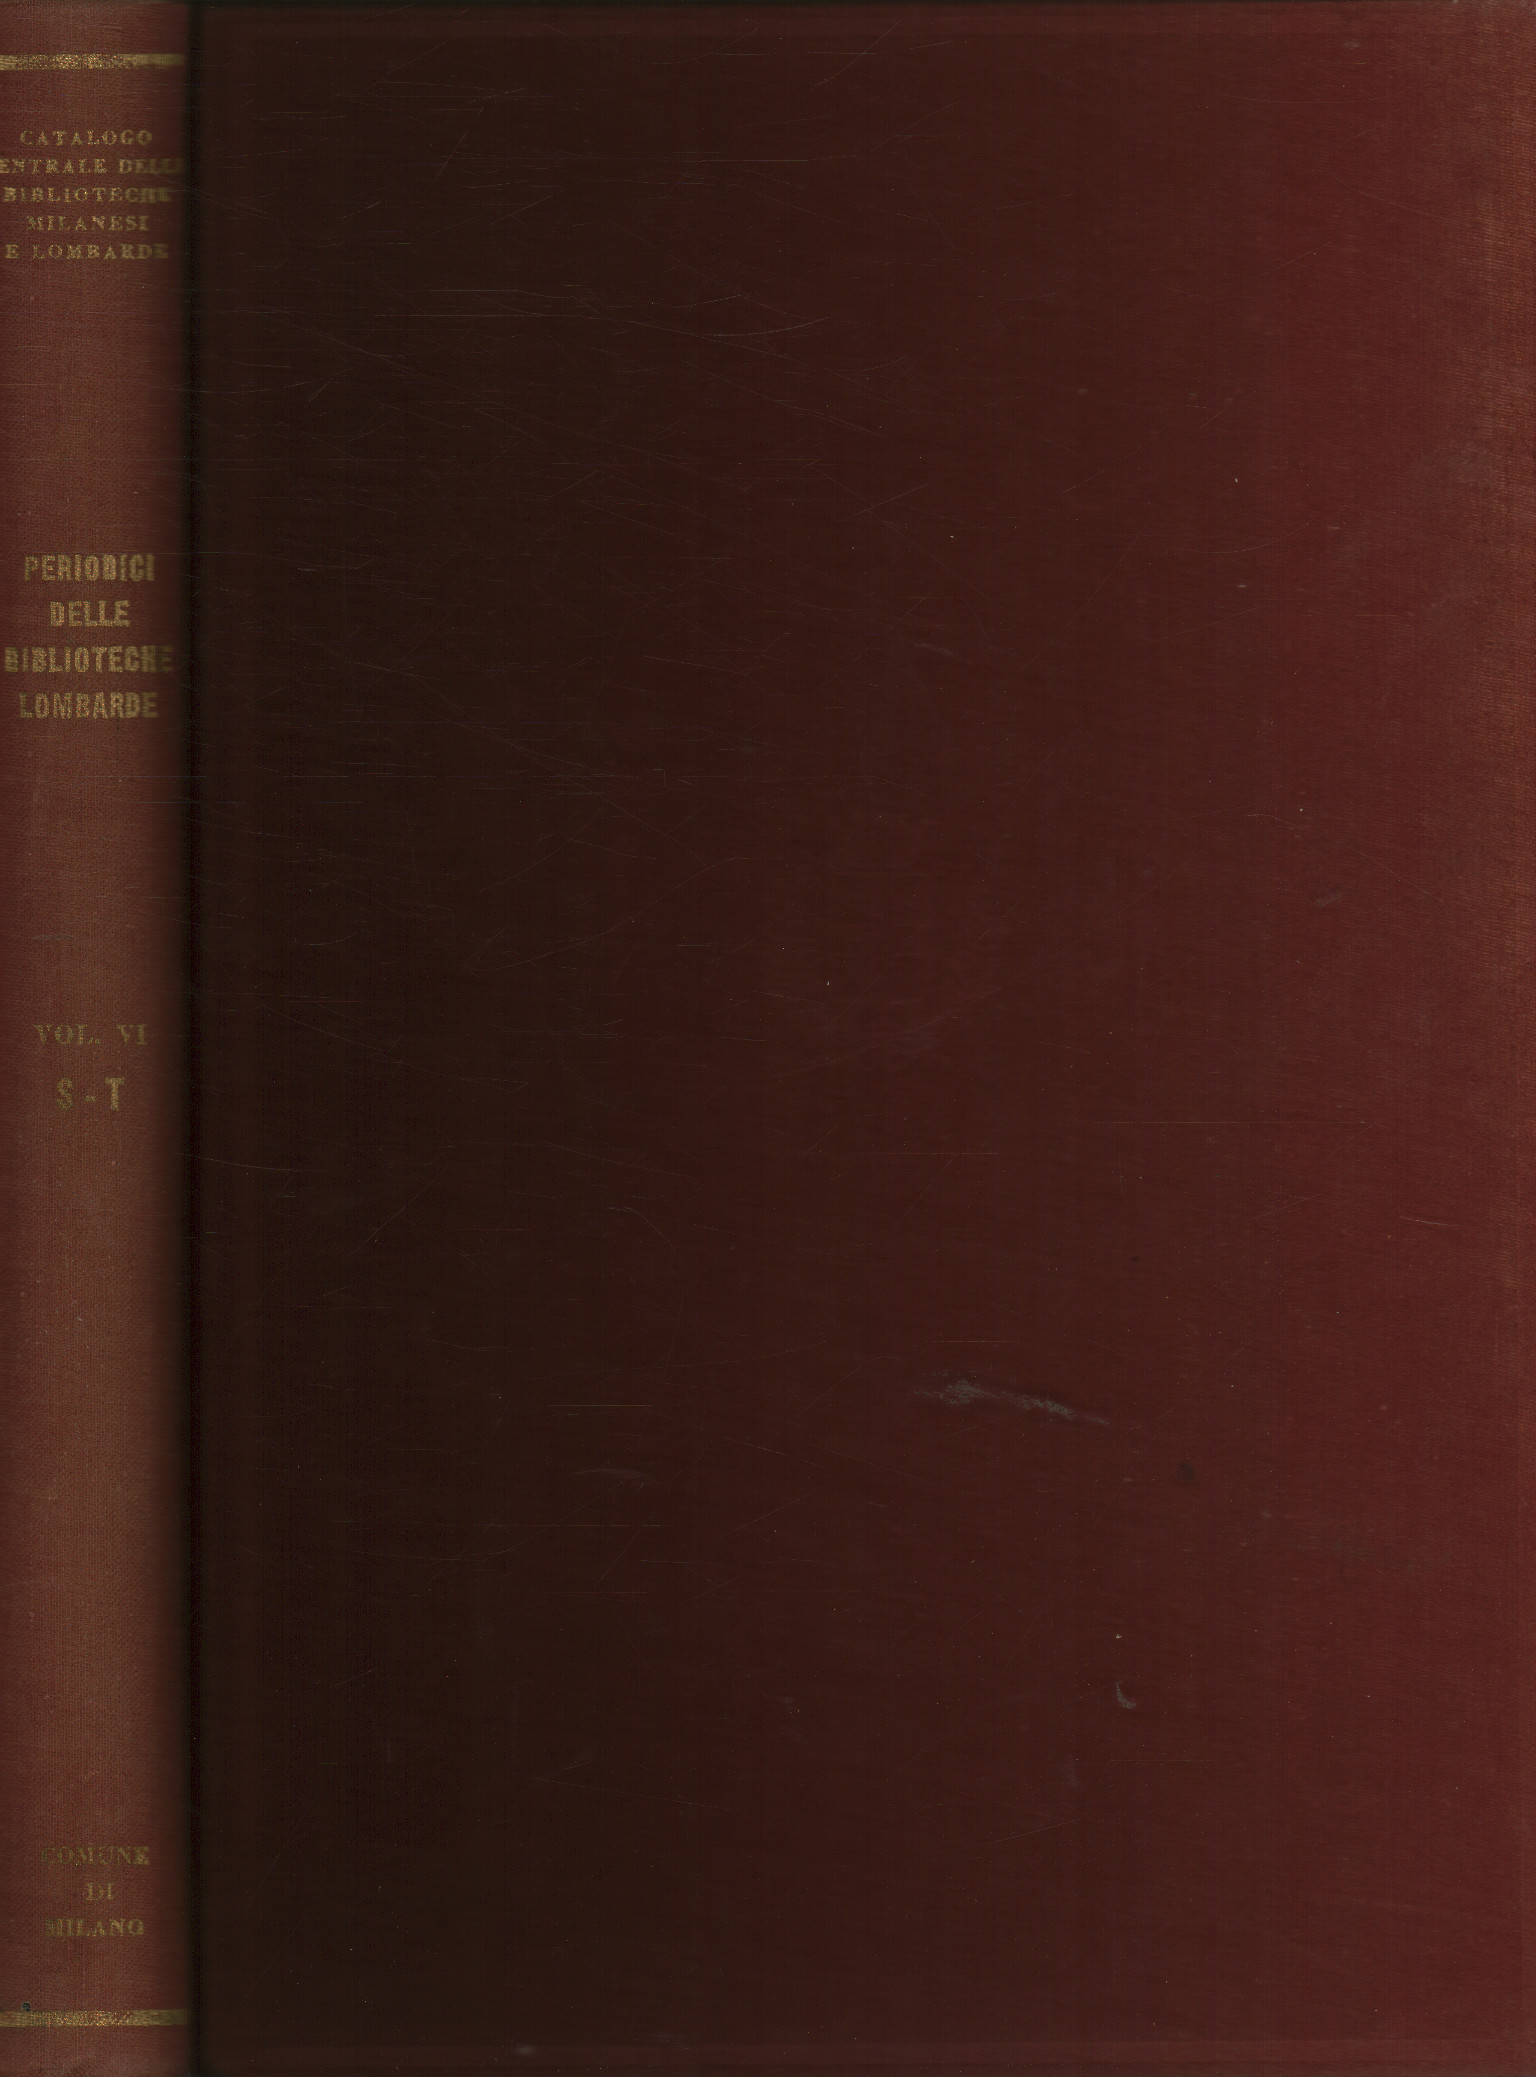 Catalog of periodicals of Lombard libraries., AA.VV